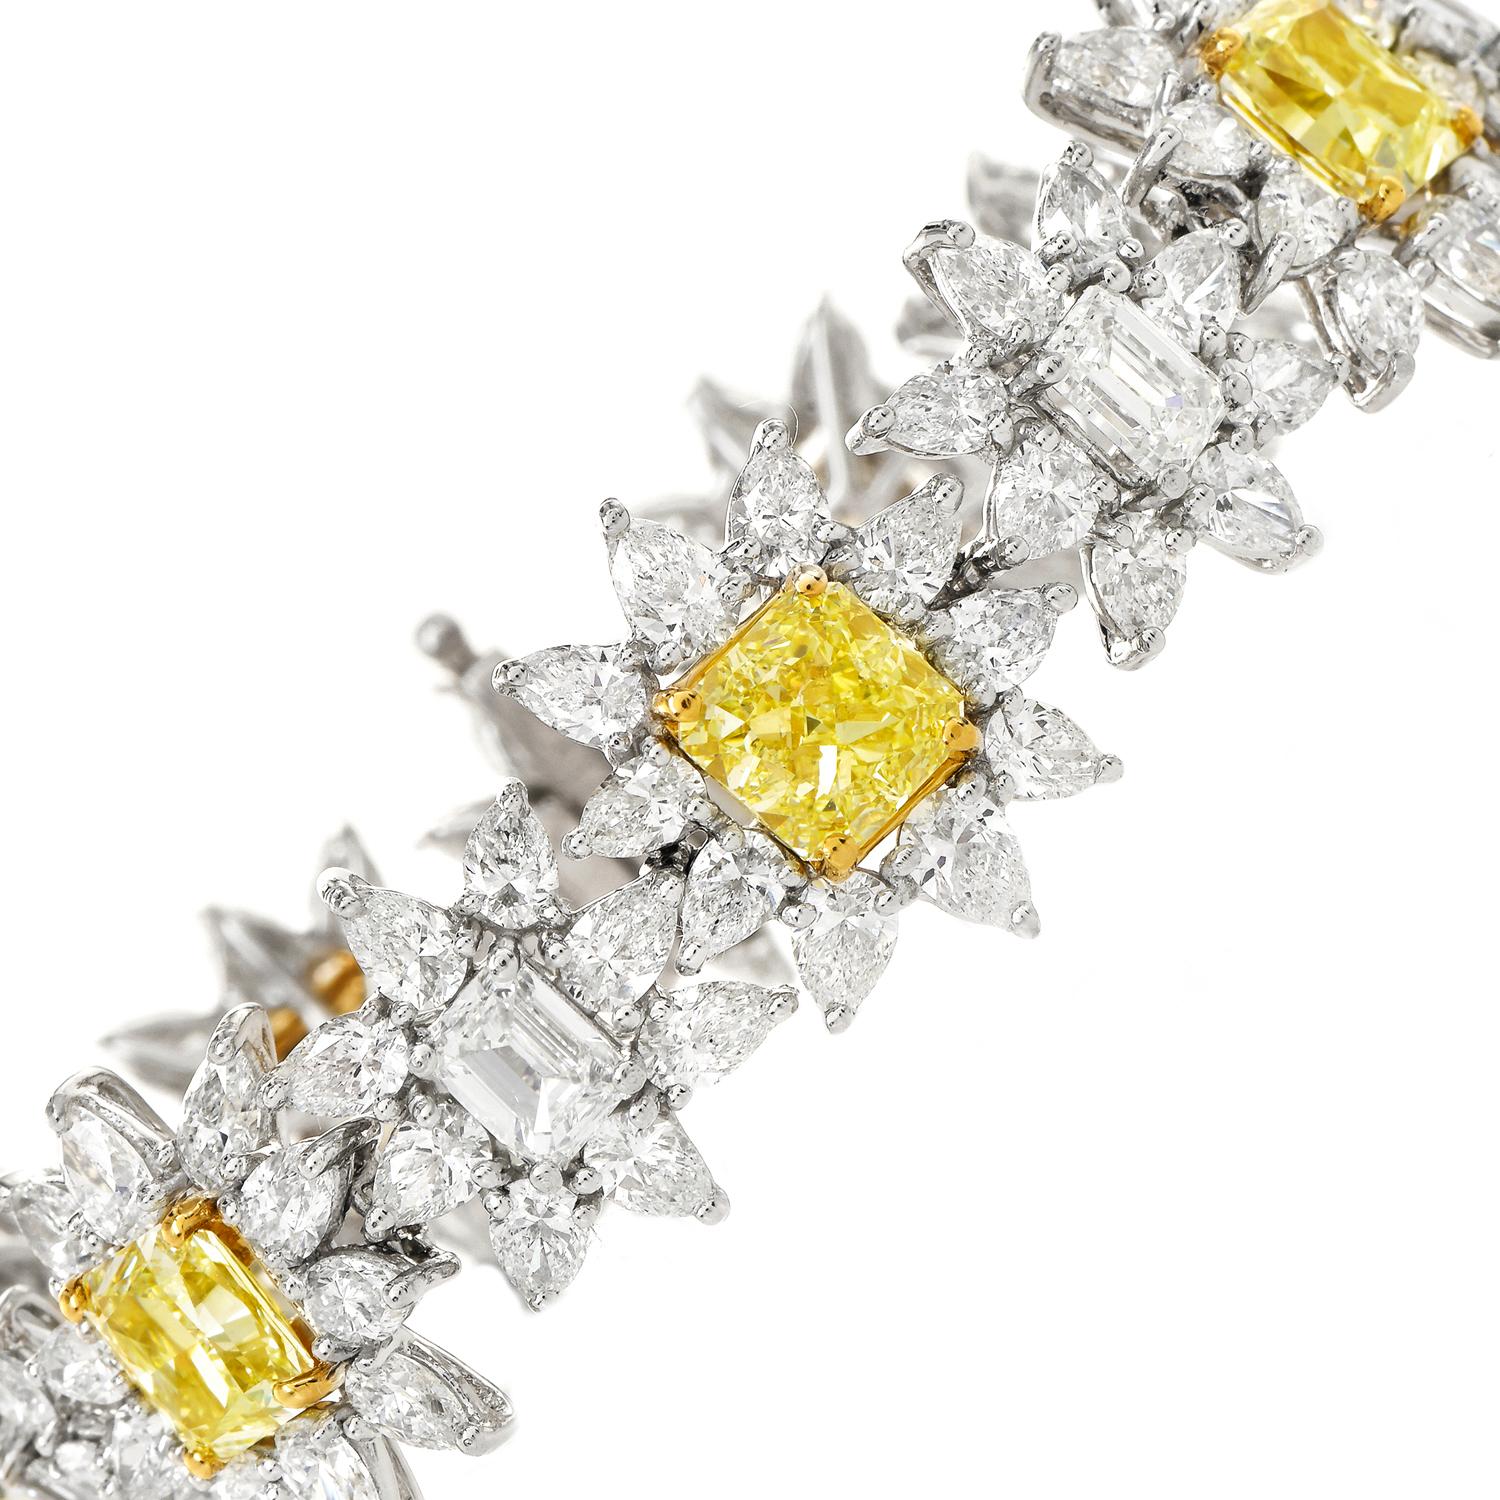 This alluring bracelet was crafted in Luxurious Platinum and accented by 18K yellow gold prongs.
Prominently features in the center 70 Natural  Fancy Light Yellow Diamond, Modified Cushion Cut, 13.35  carats, and VVVS1 to VS1 clarity all with GIA